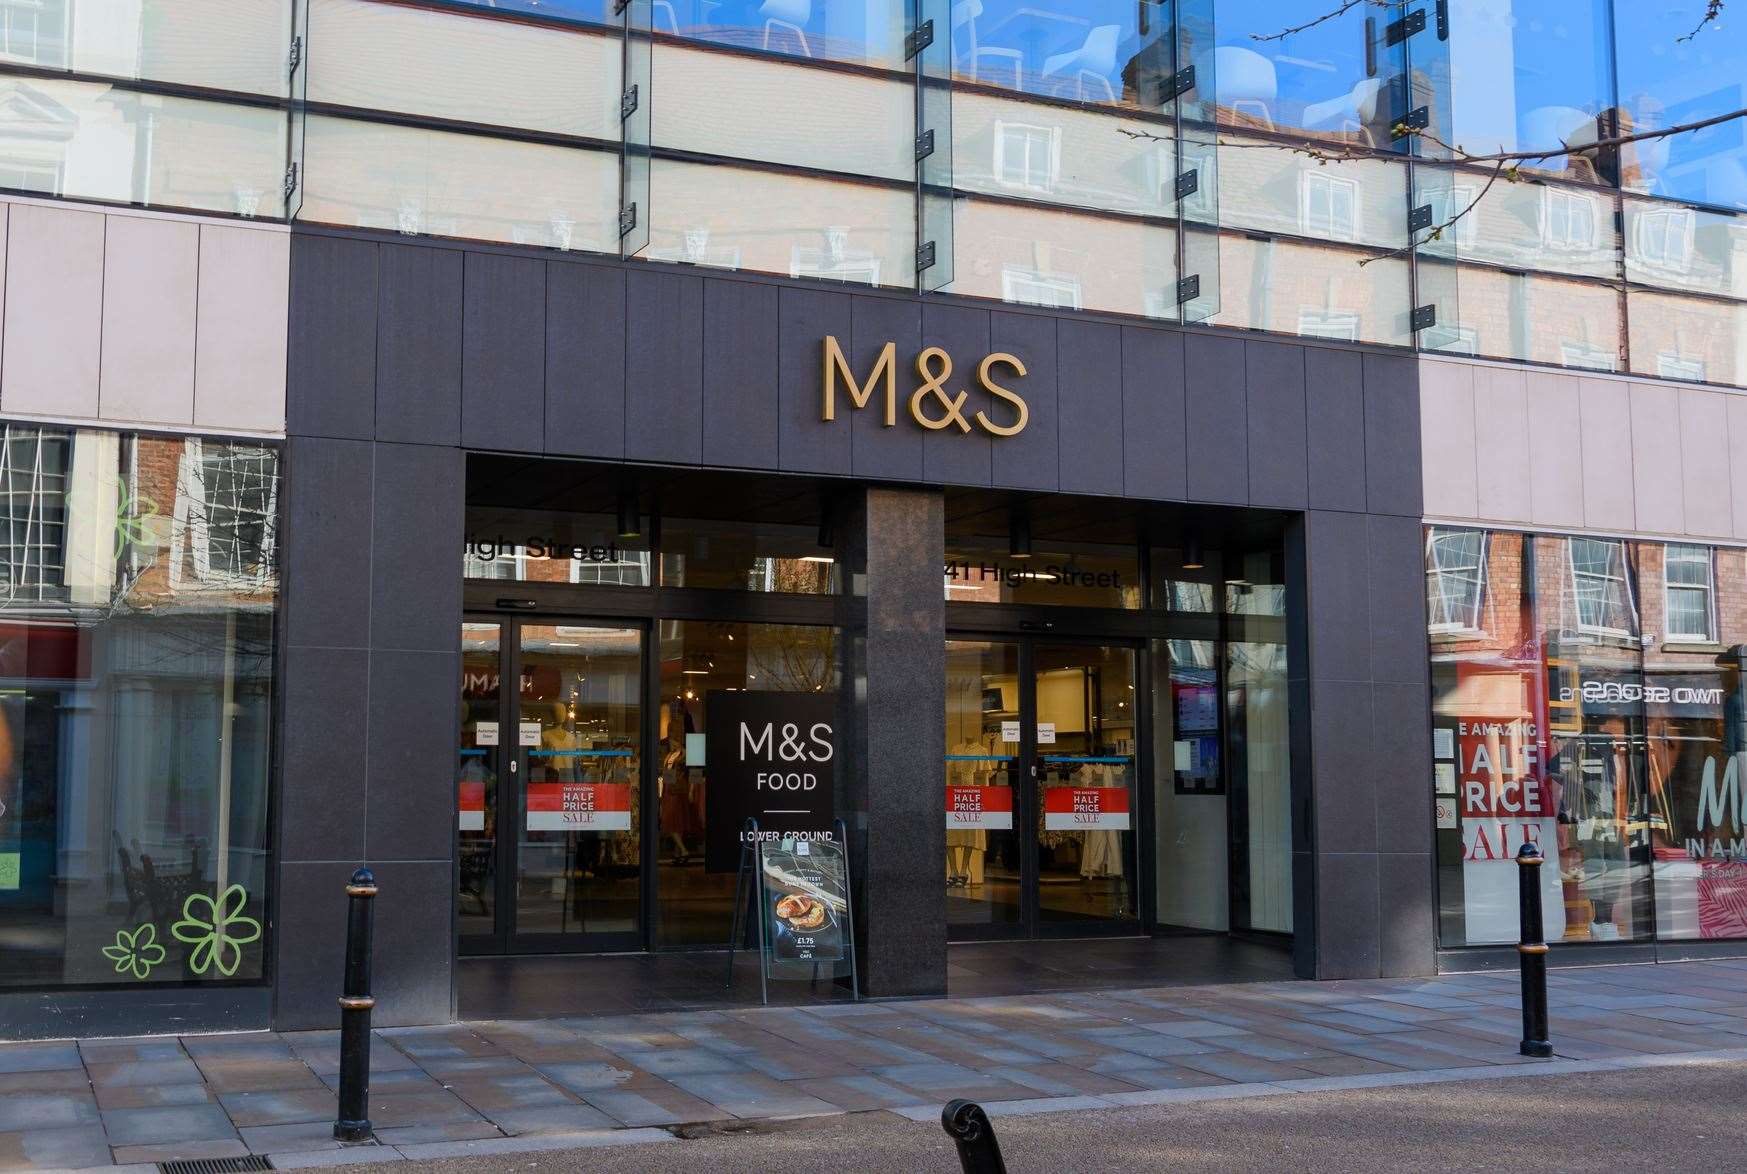 M&S offers its Sparks customers a free treat every time they place pre-loved clothes into one of their ‘Shwop’ boxes in store